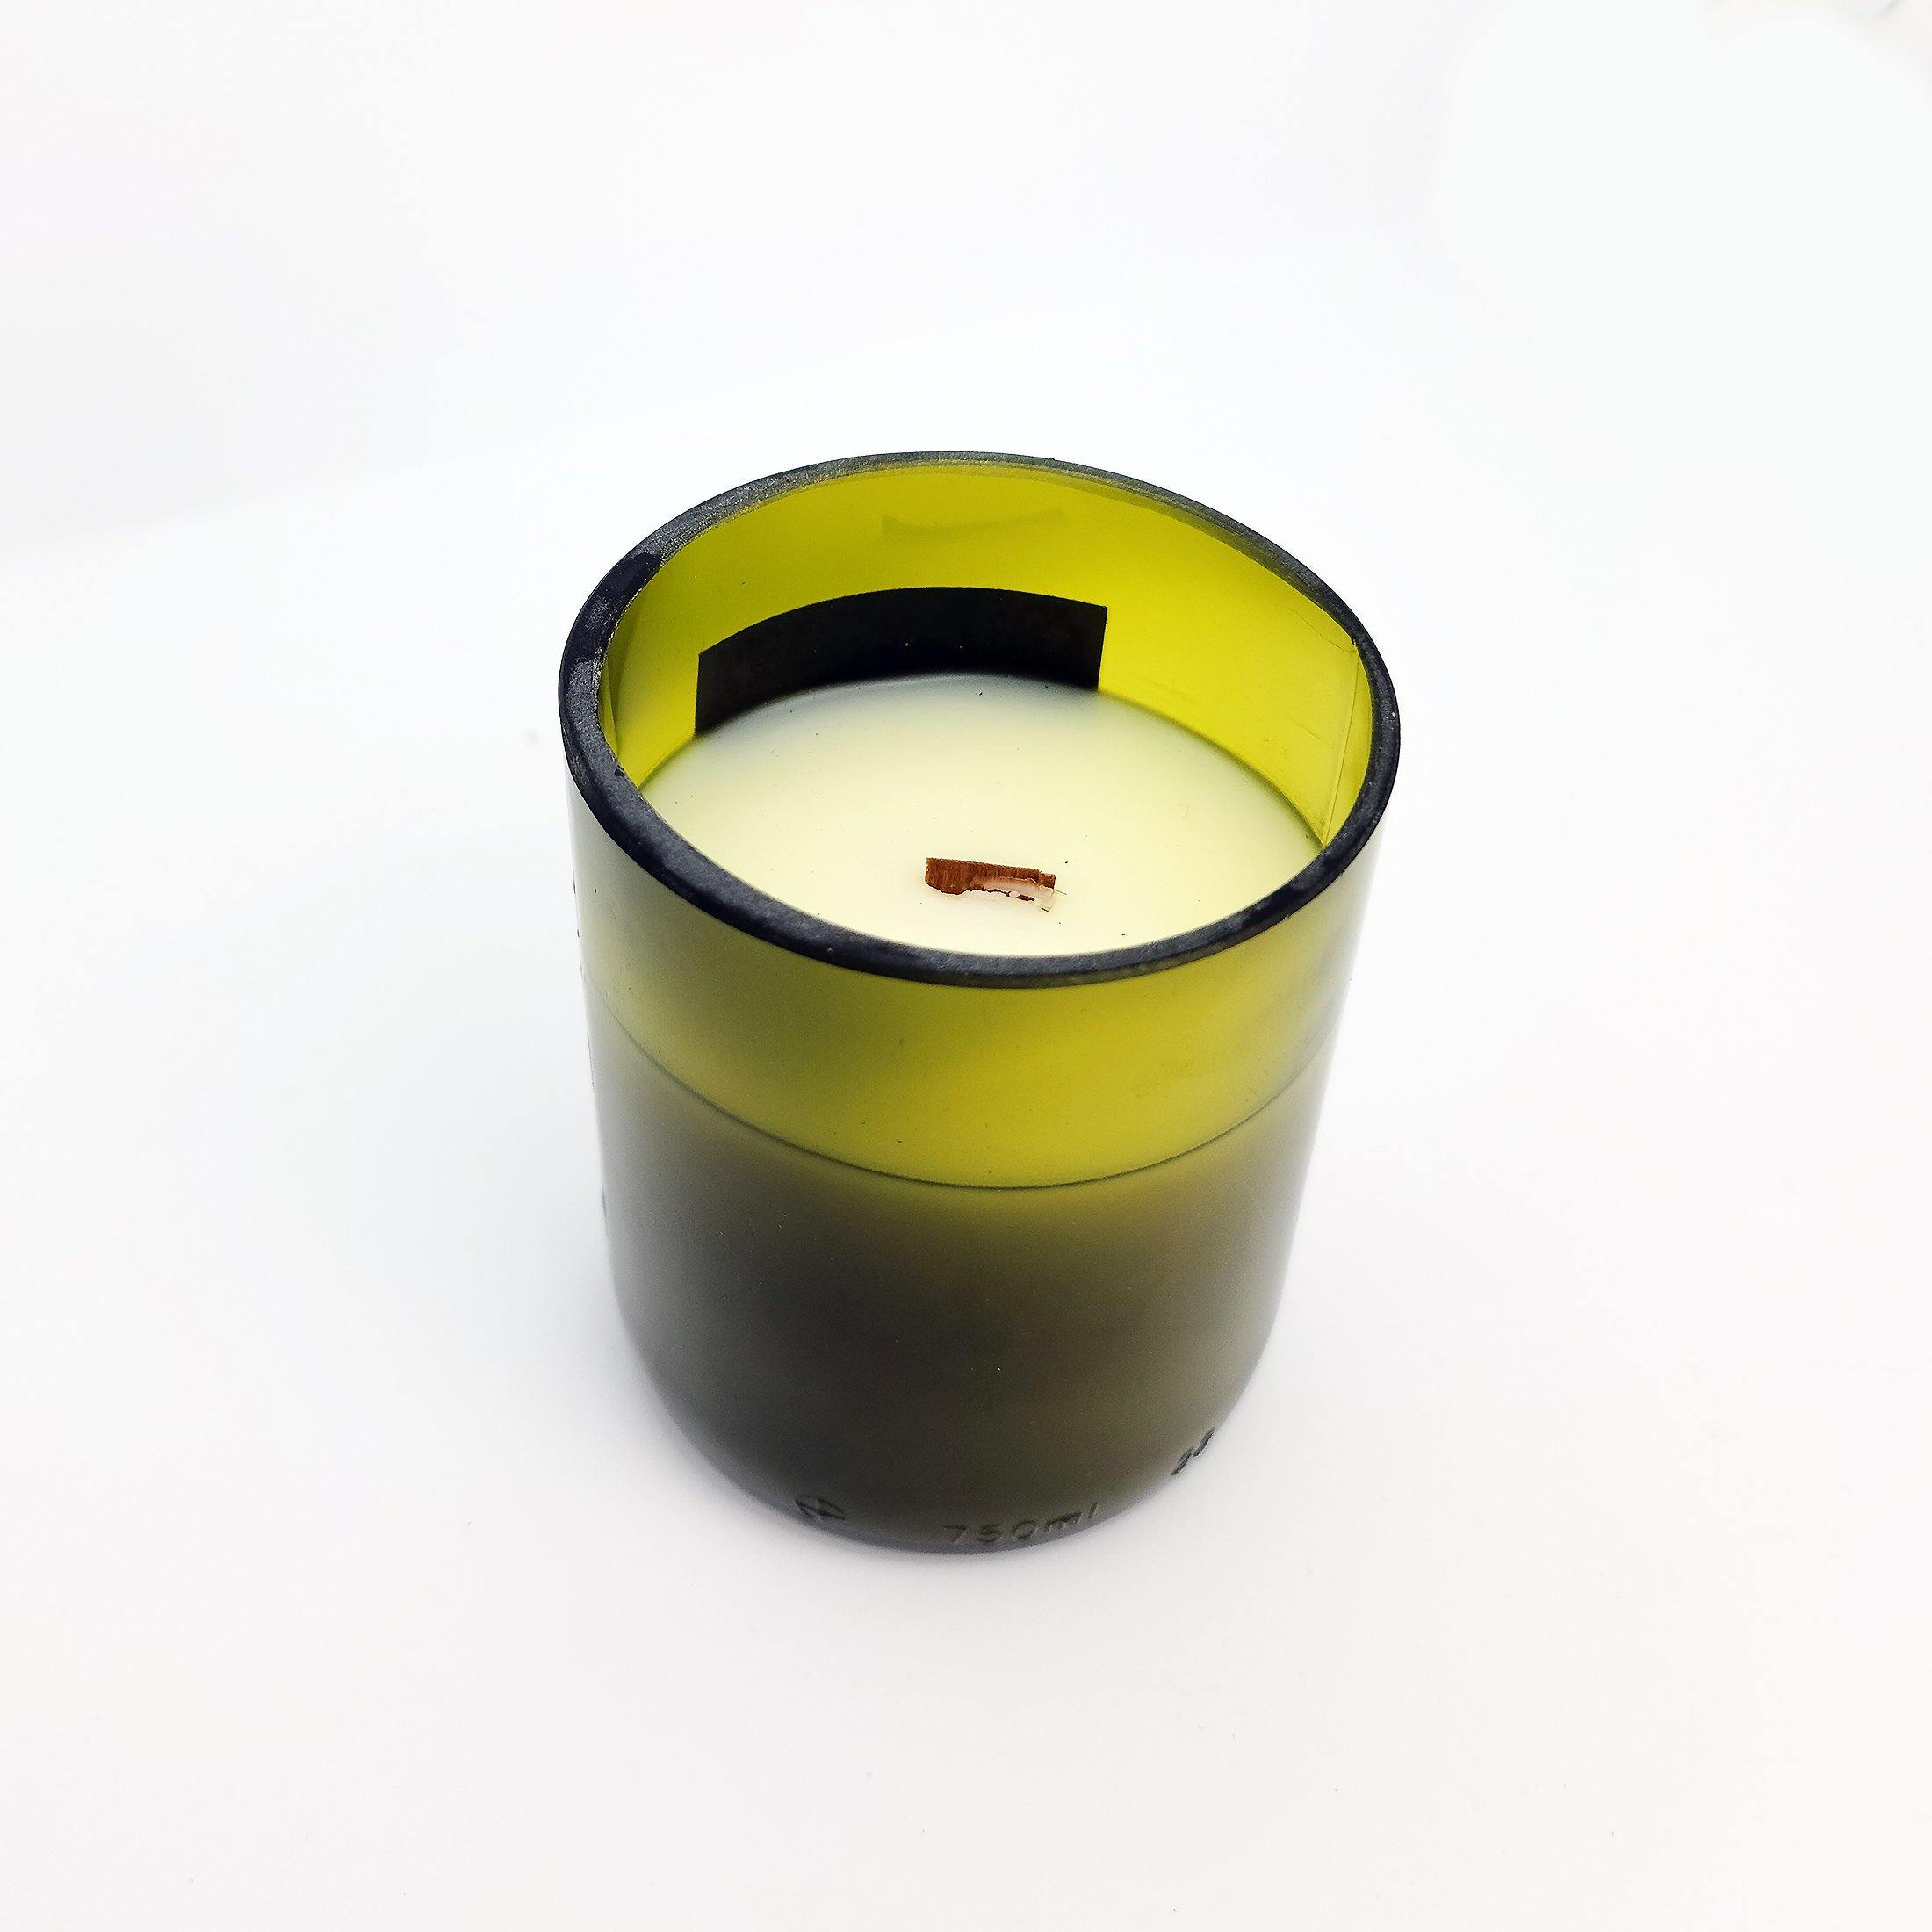 Mandarin & Resin Wooden Wick Scented Candle - LUVOCANDLES - Scented Wooden Wick Handmade in Montreal